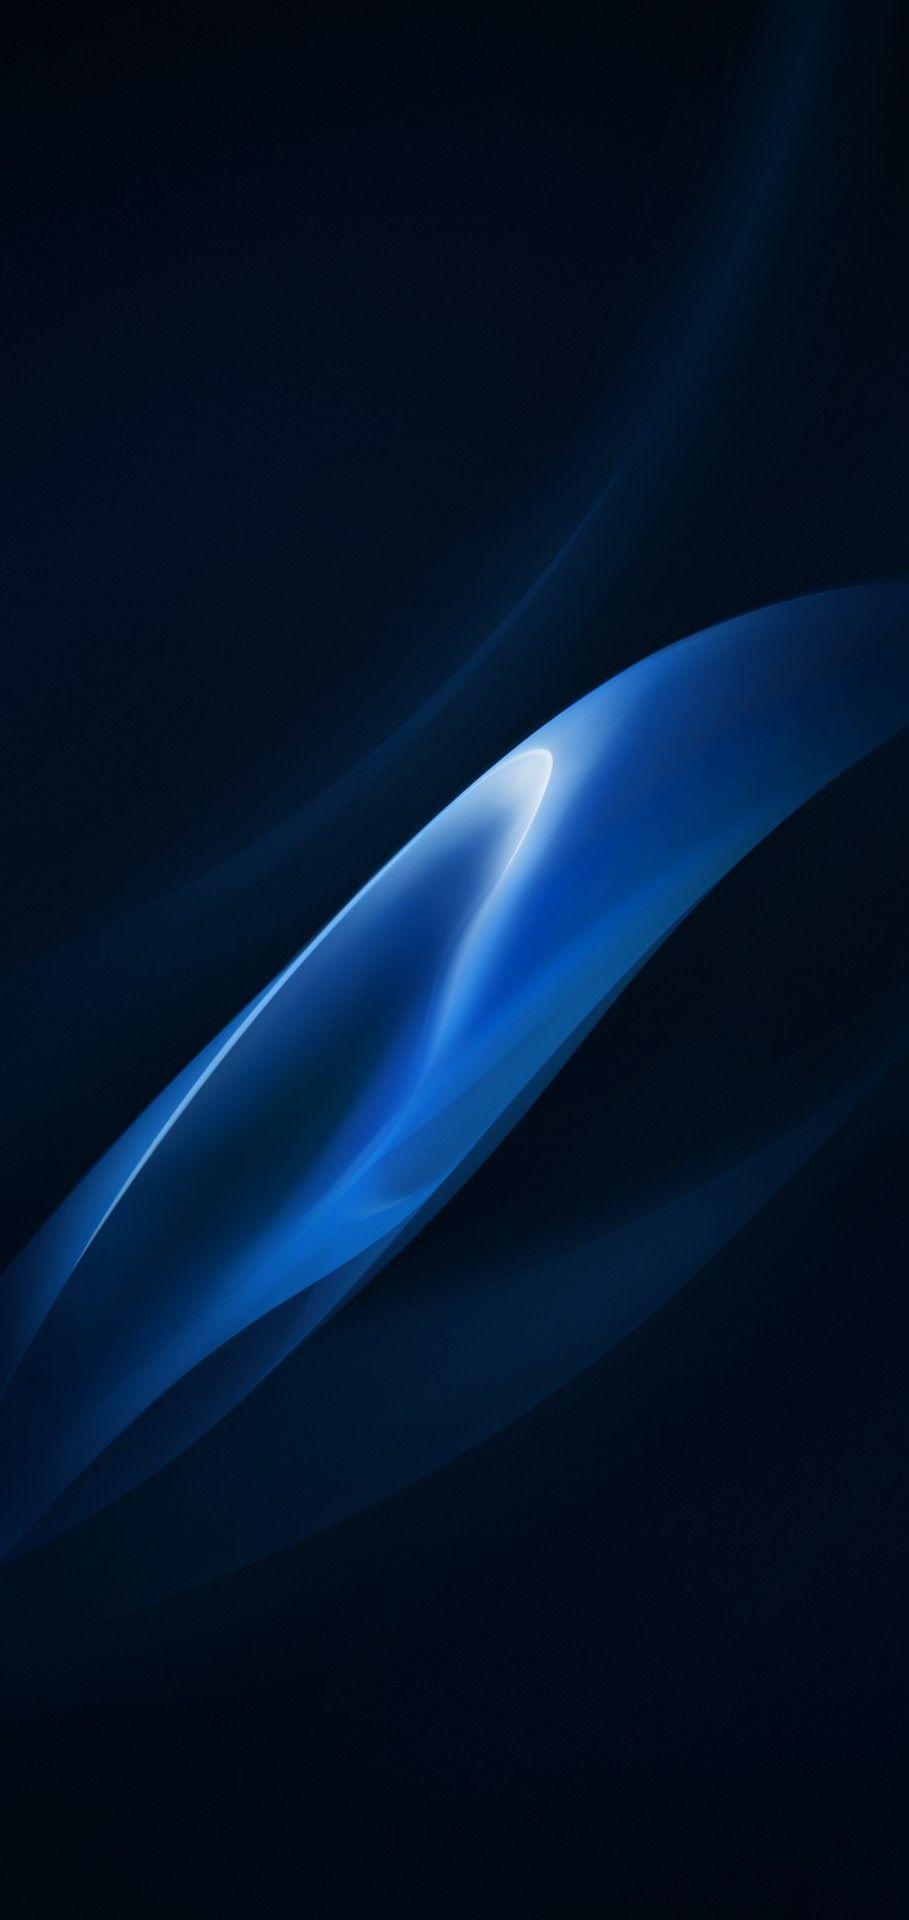 OPPO R15's Official Wallpaper Are Now Available: Download